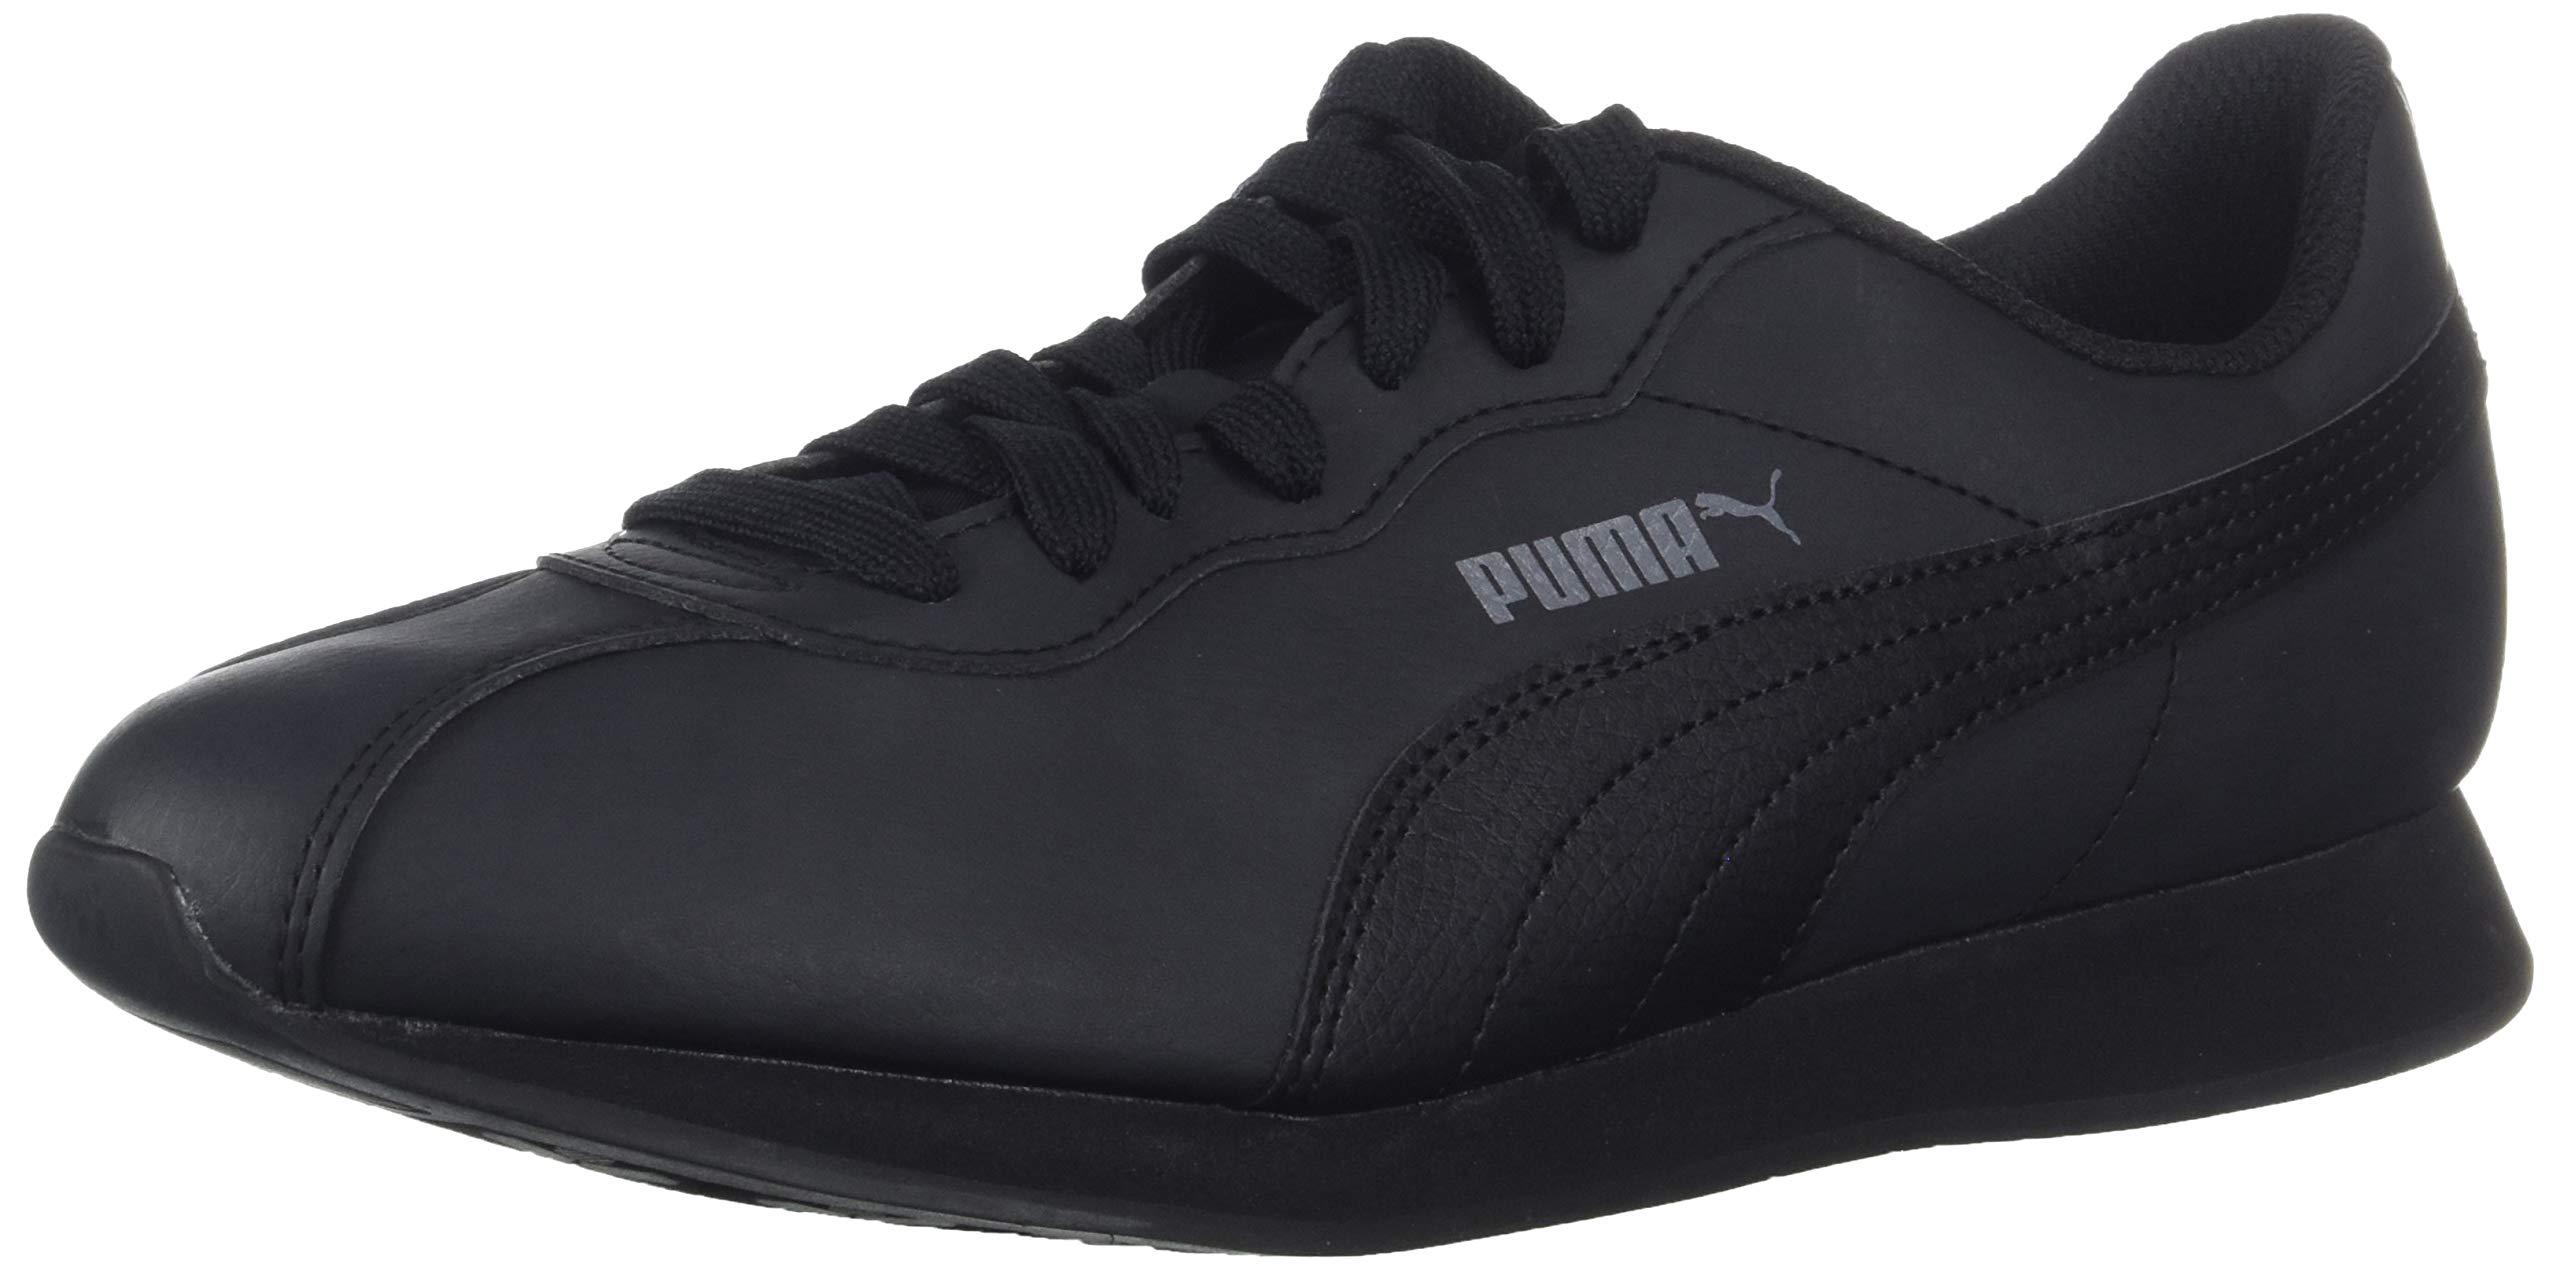 PUMA Synthetic Turin Ii Fitness Shoes in Black-White (Black) for Men | Lyst